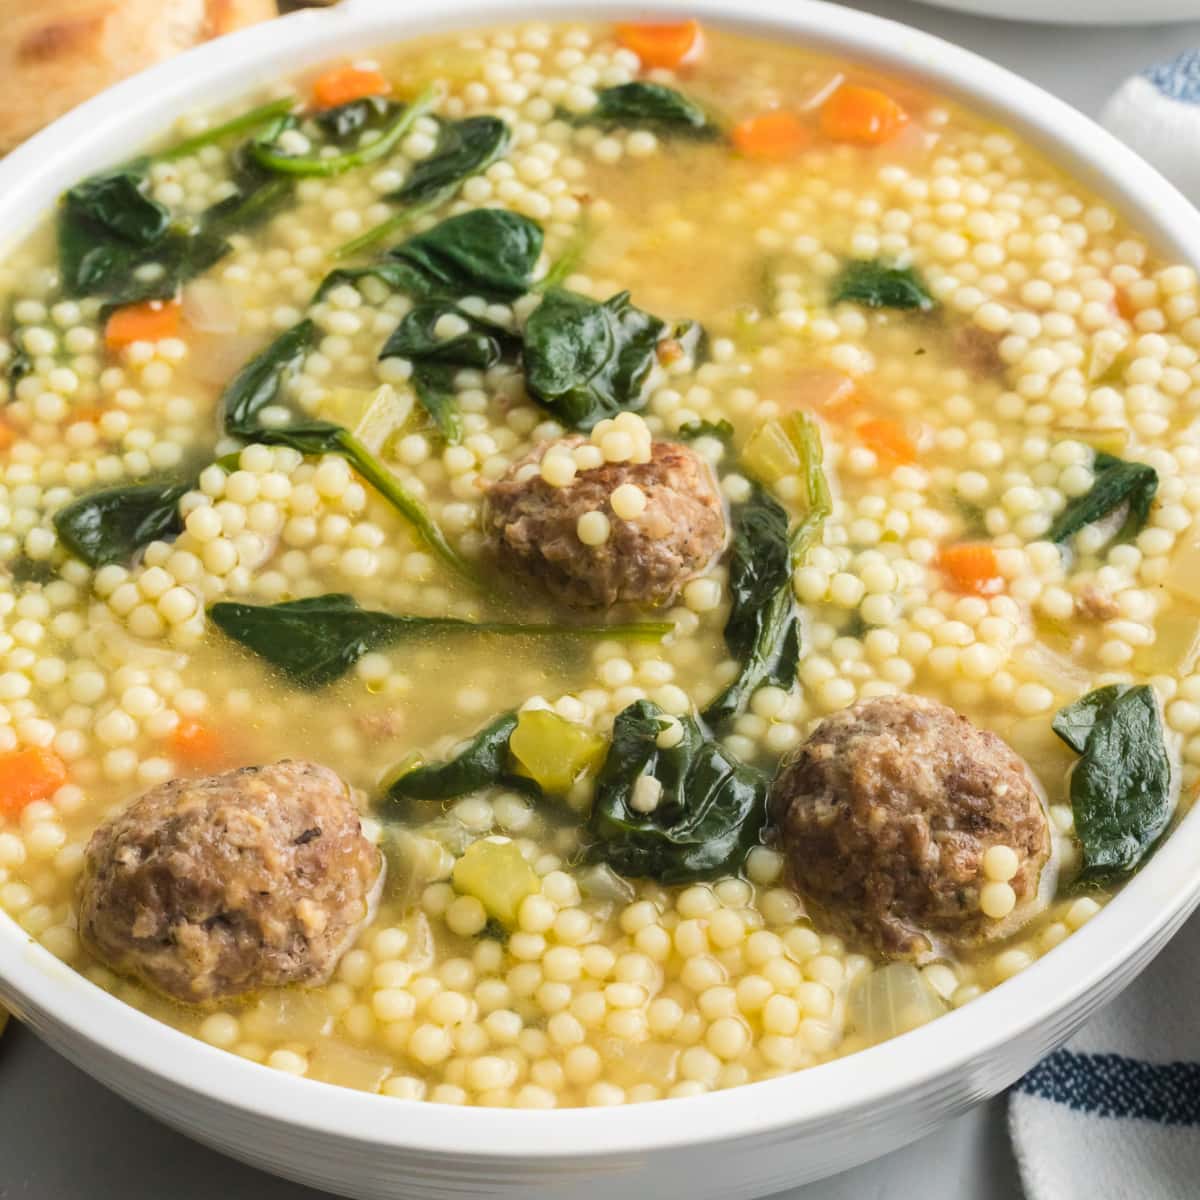 https://kitchenfunwithmy3sons.com/wp-content/uploads/2020/01/italian-wedding-soup-feature.jpg